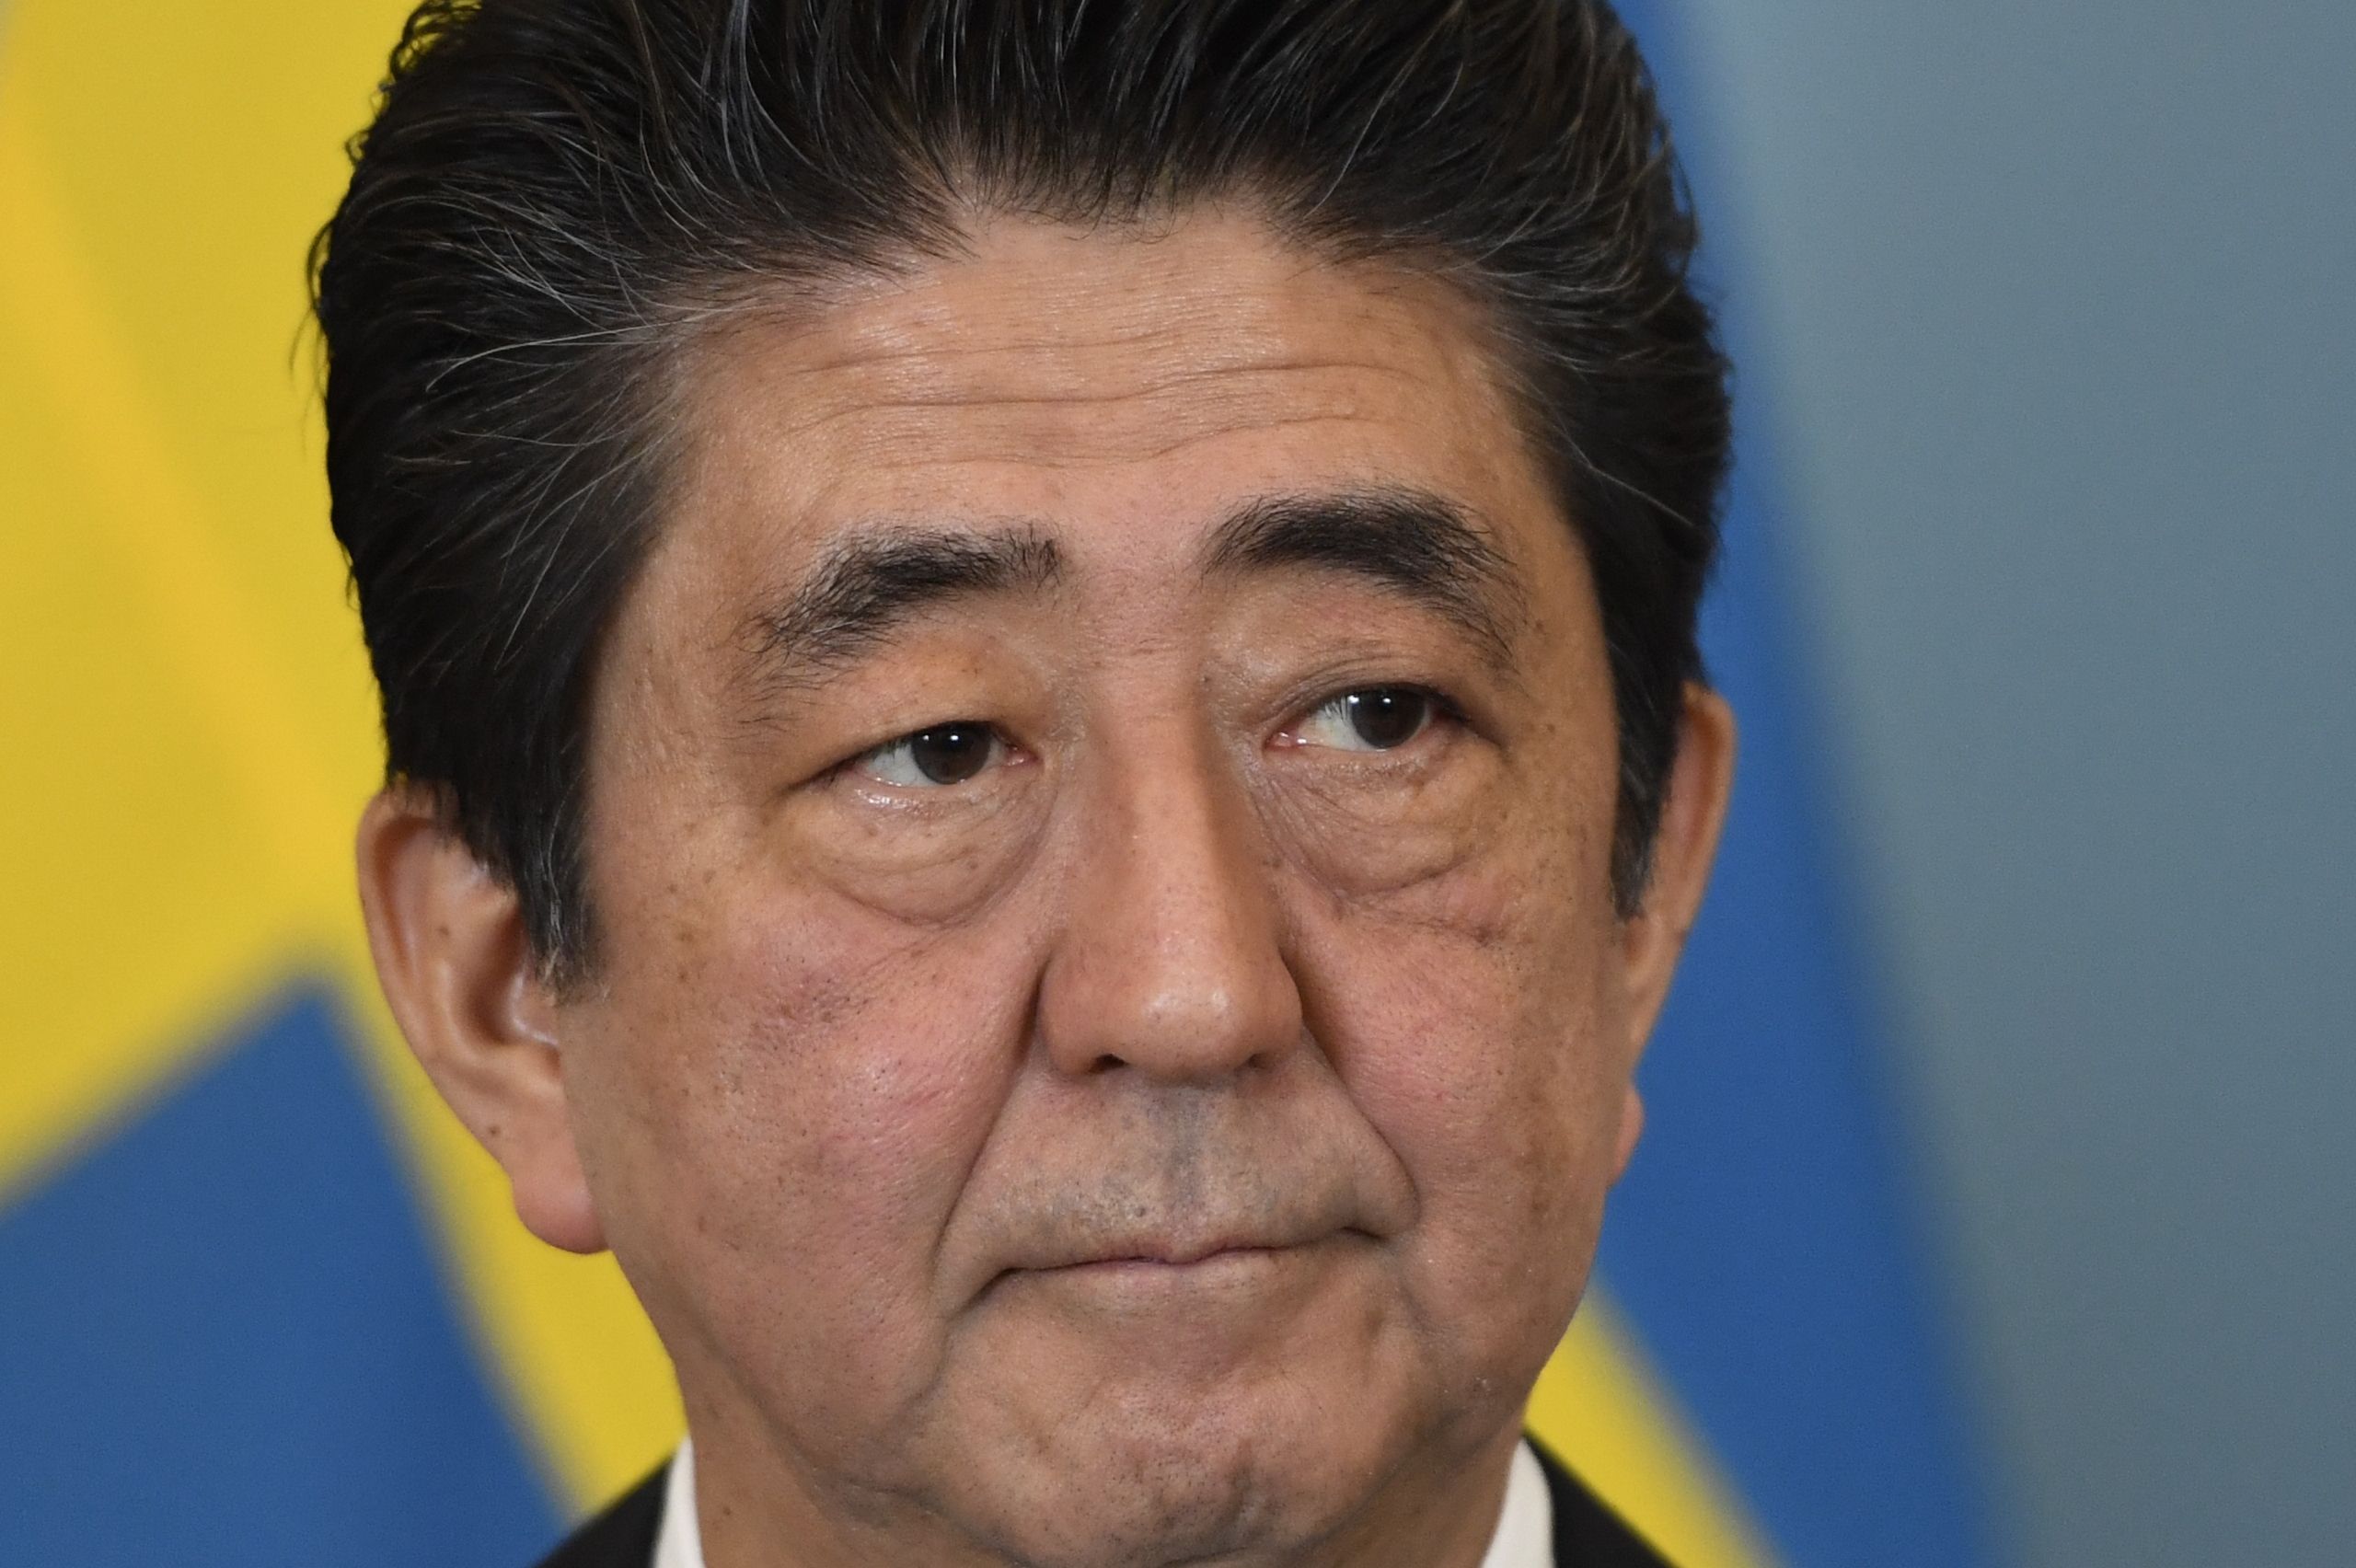 Japan's Prime Minister Shinzo Abe at a joint press conference with the Swedish Prime Minister in Stockholm, July 9, 2017. (Maja Suslin—AFP/Getty Images)